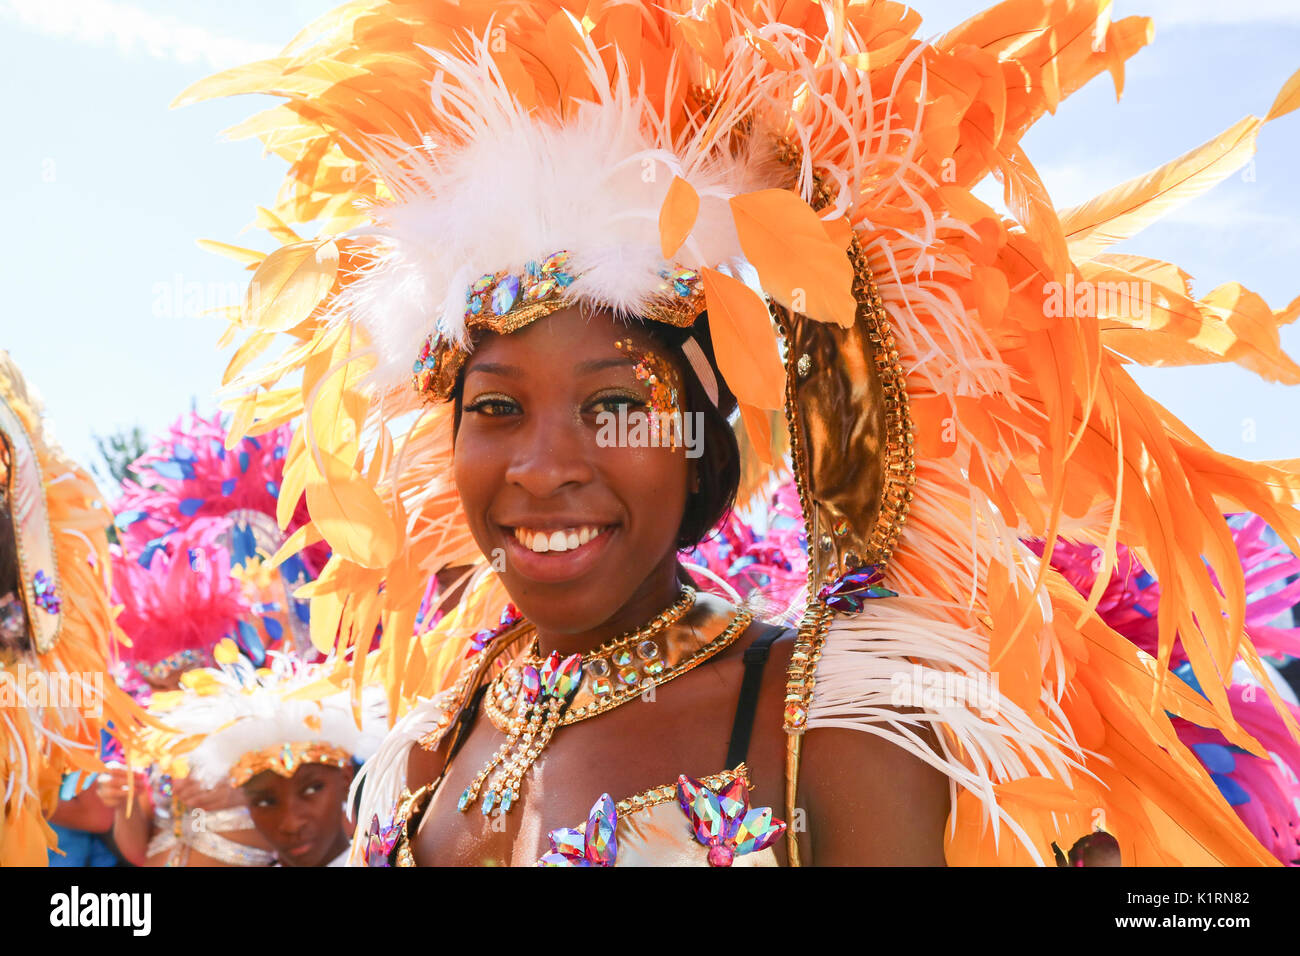 London, UK. 27th Aug, 2017. The Notting Hill Carnival kicked Off with a family day parade with  children dressed in colorful Samba costumes. The Notting Hill carnival which celebrates Afro-Caribbean culture by the British West Indian community is expected to attract 1 million revellers over the August bank holiday Credit: amer ghazzal/Alamy Live News Stock Photo